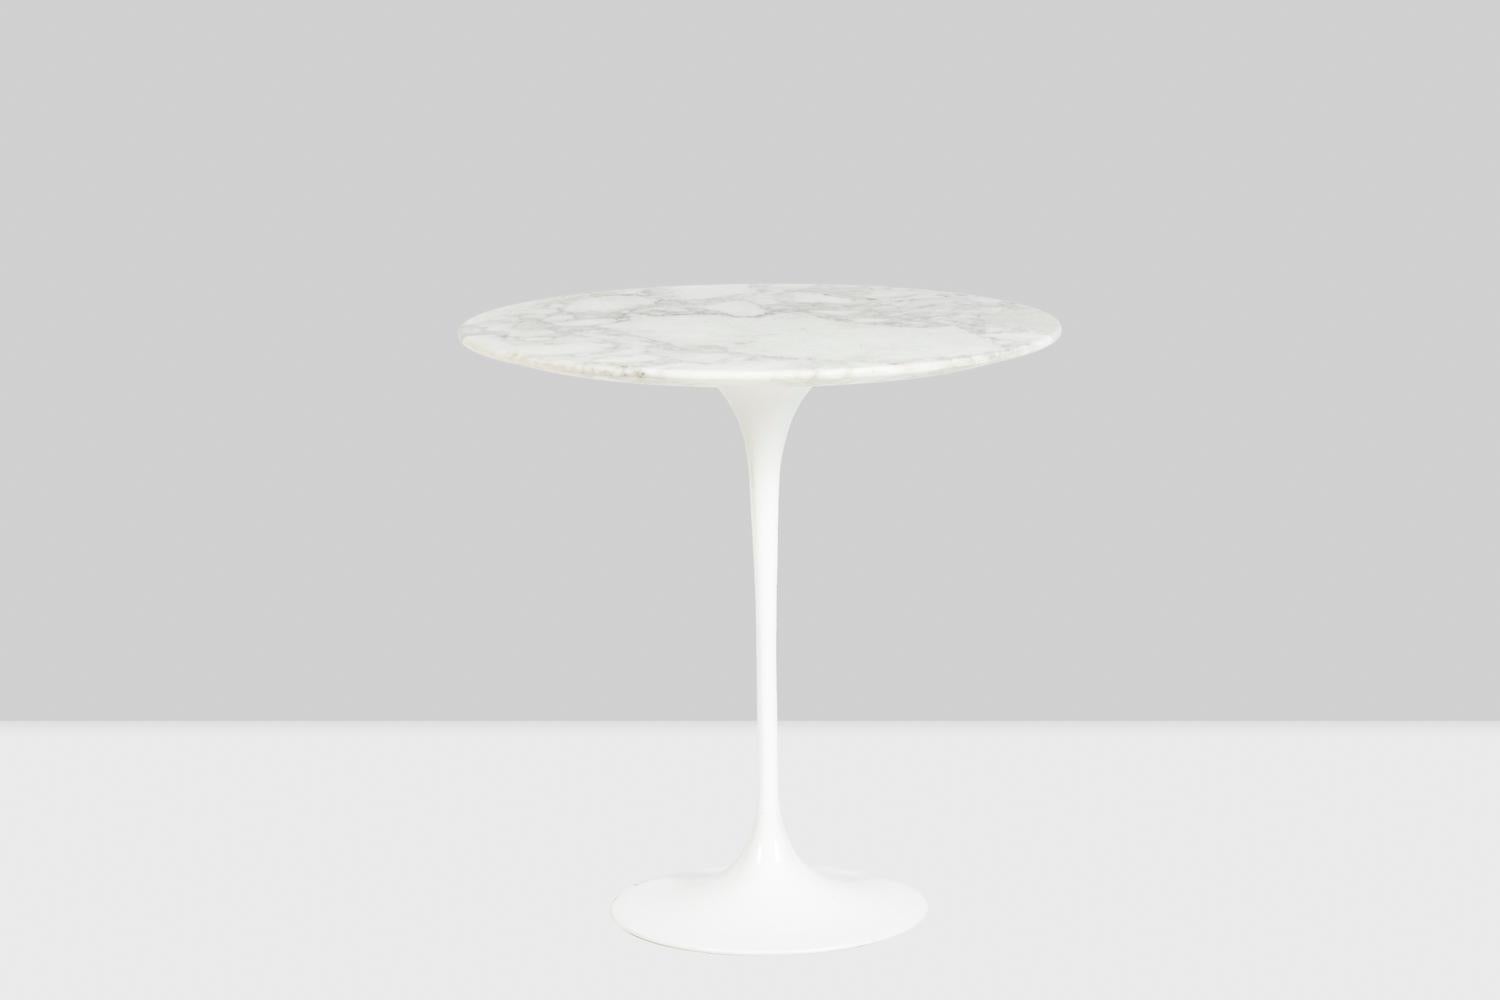 Eero Saarinen, by.
Florence Knoll, edited by.

Pedestal table model “Tulip”, with its Arabesco marble top and its white lacquered cast aluminum base.

American work realized at the end of the 20th century.